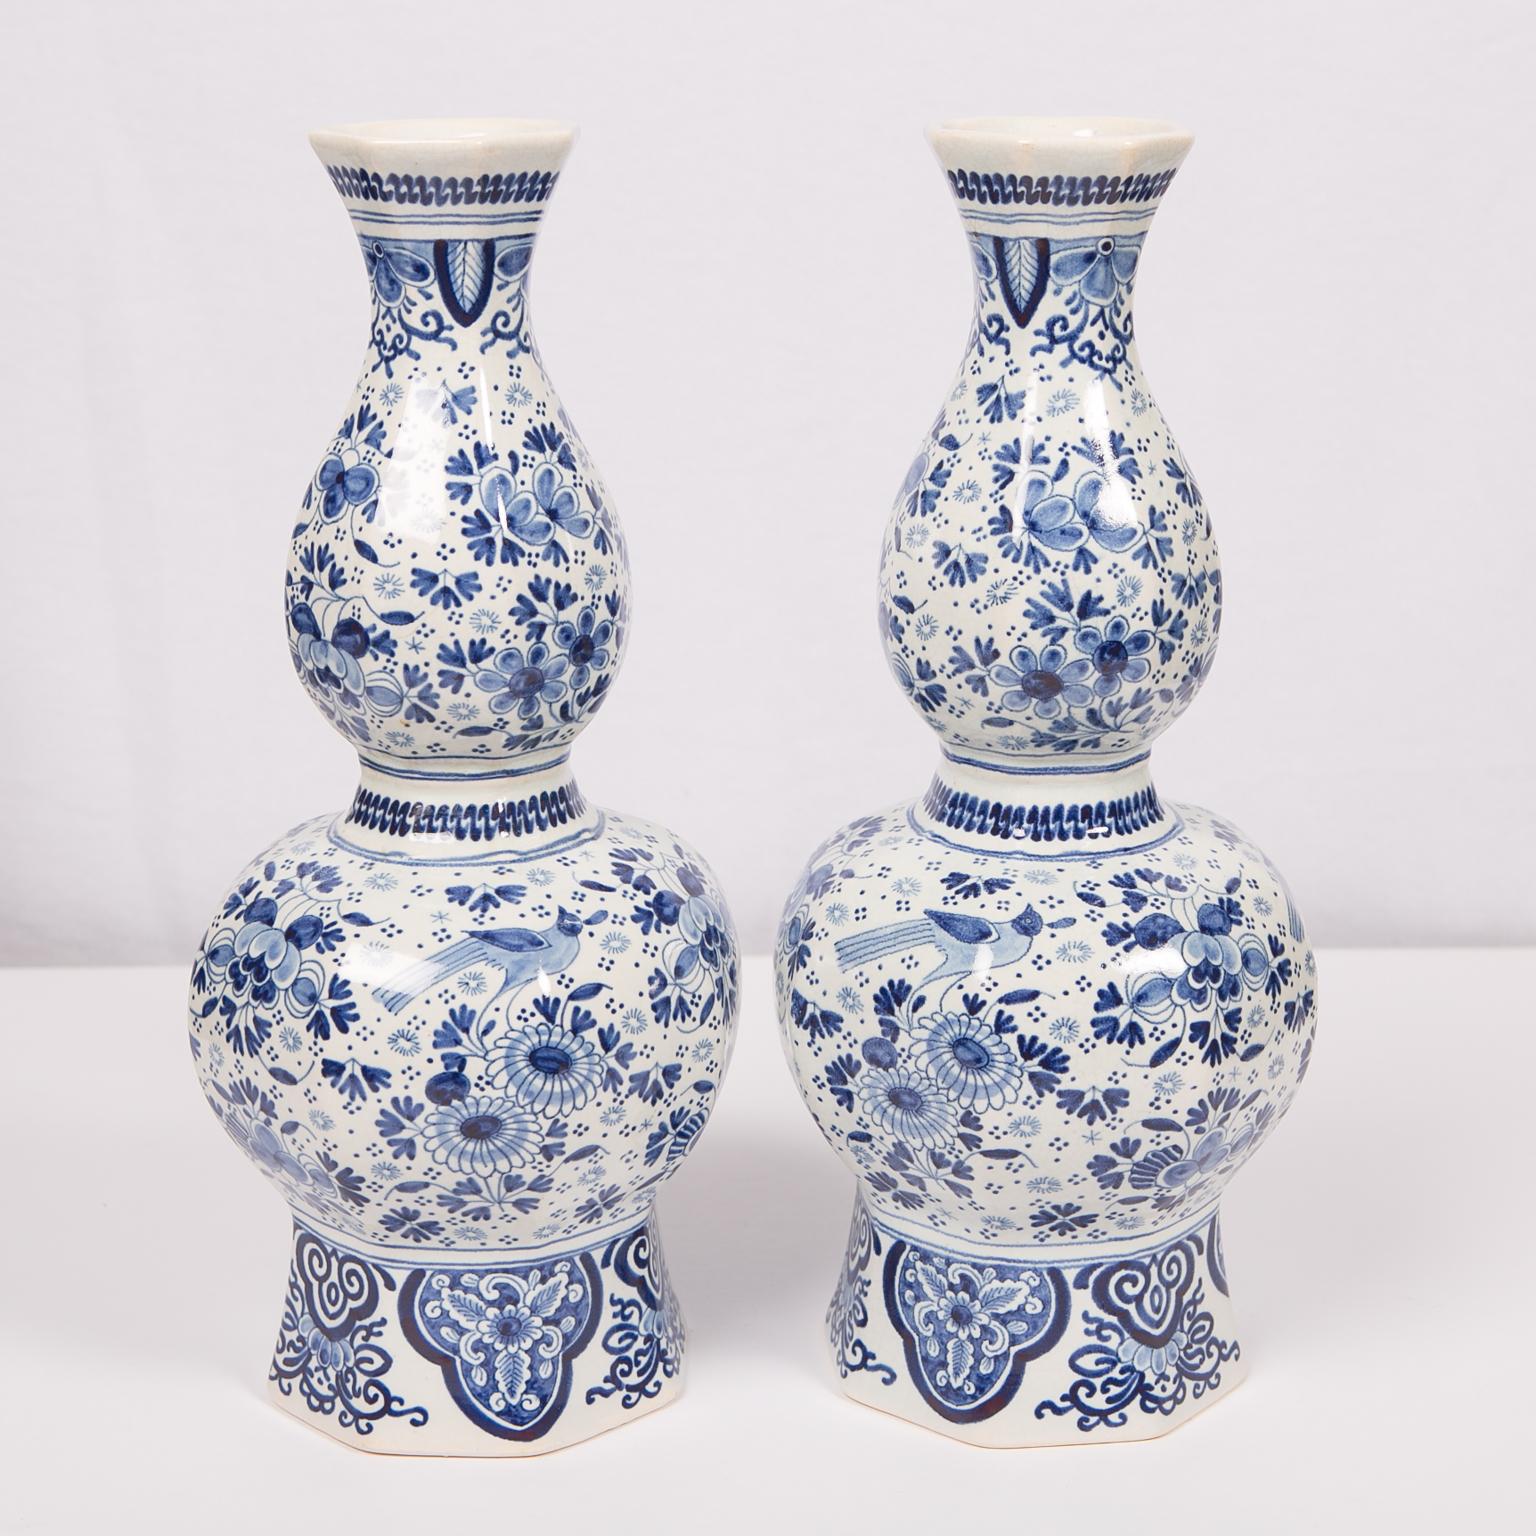 A pair of tall, octagonal Dutch Delft blue and white vases with 